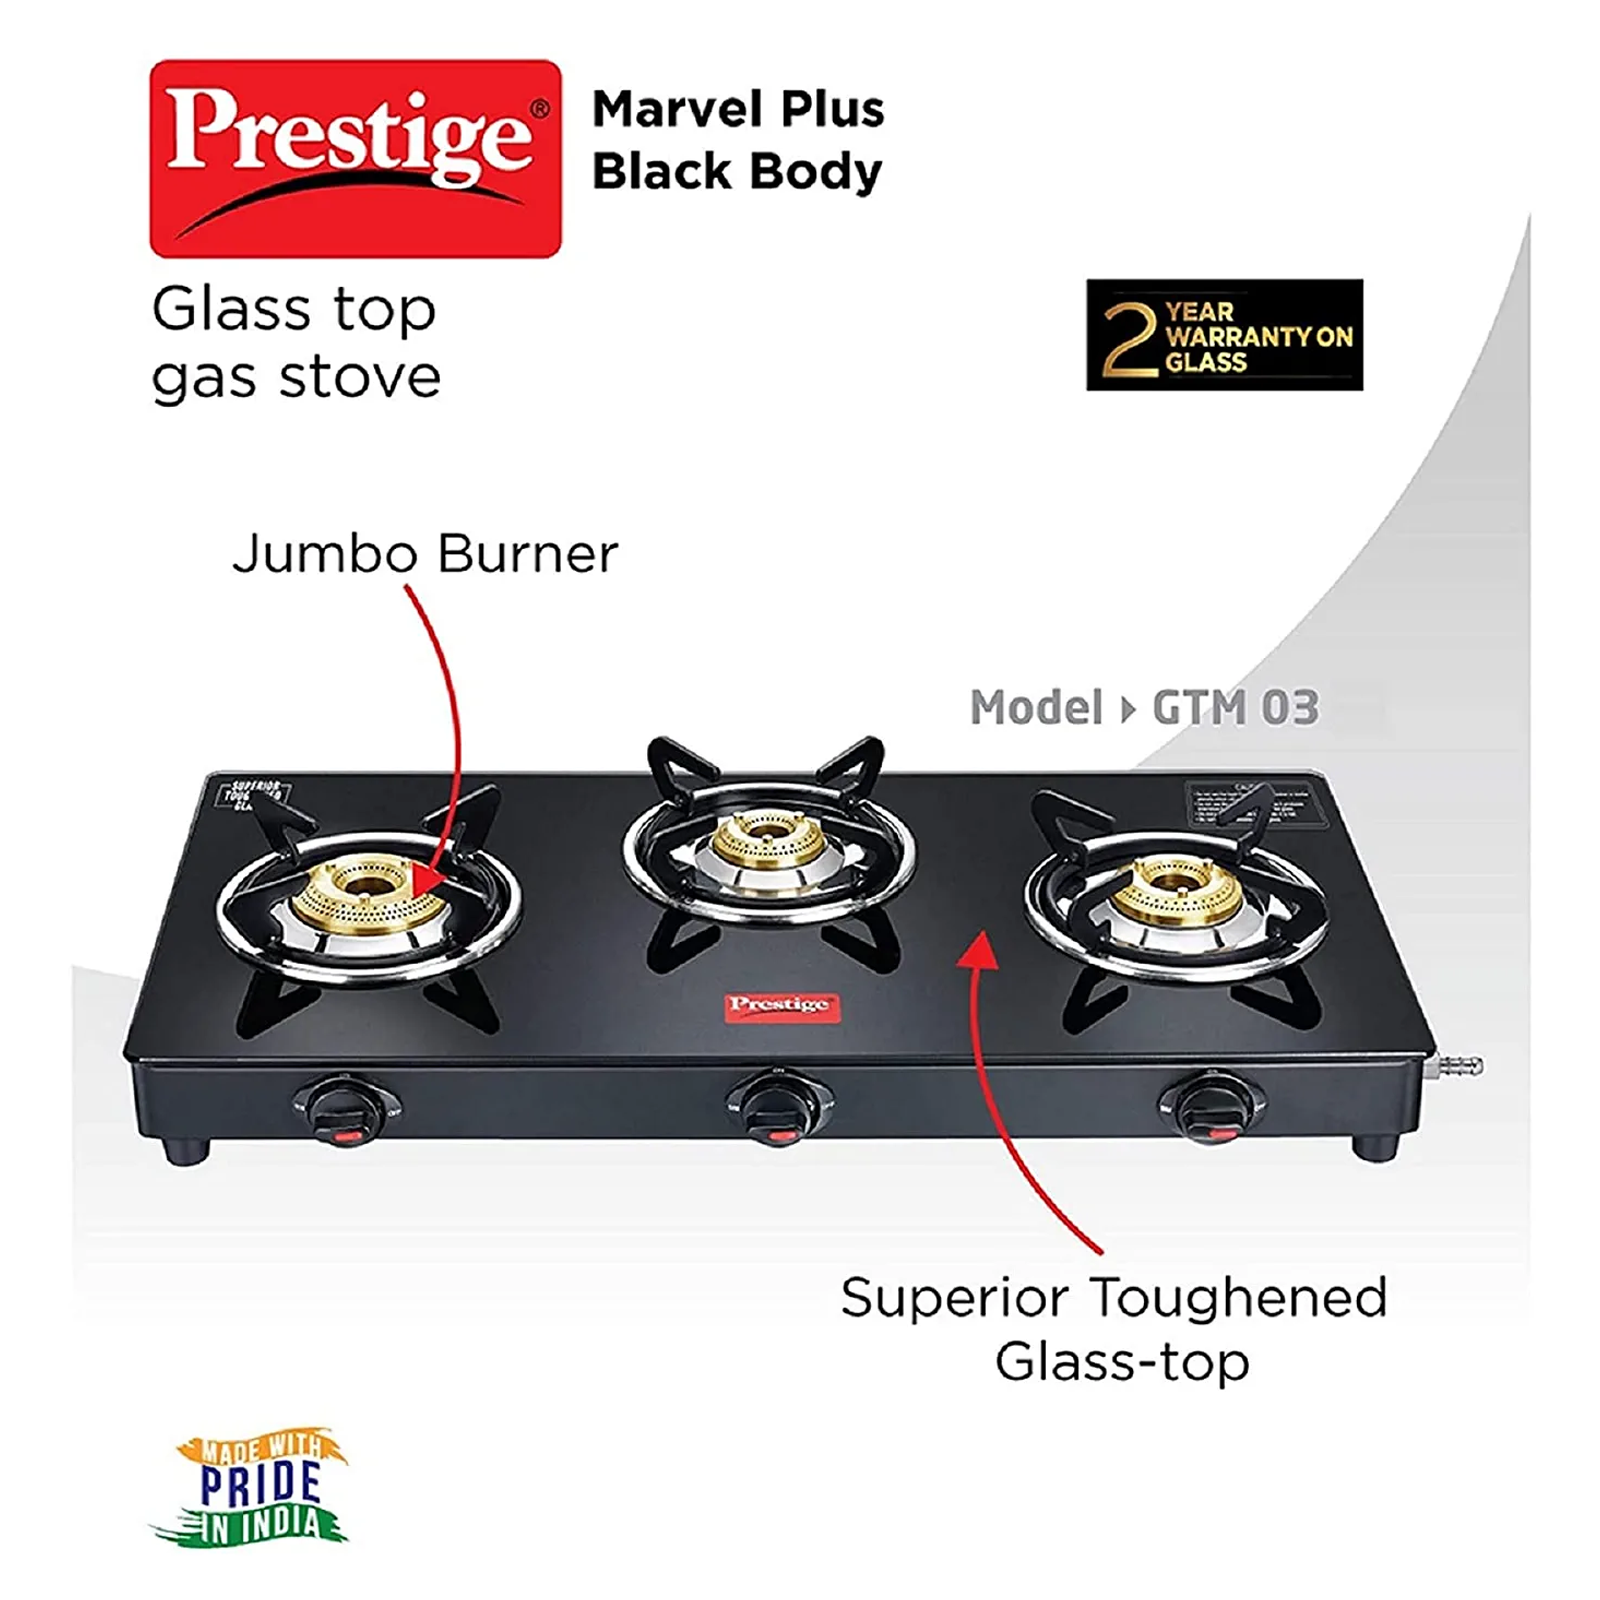 Prestige Marvel Plus GTM 03 3 Burner Toughened Glass Top Gas Stove (Spill Proof Design with Additional Drip Tray, 40189, Black)_2